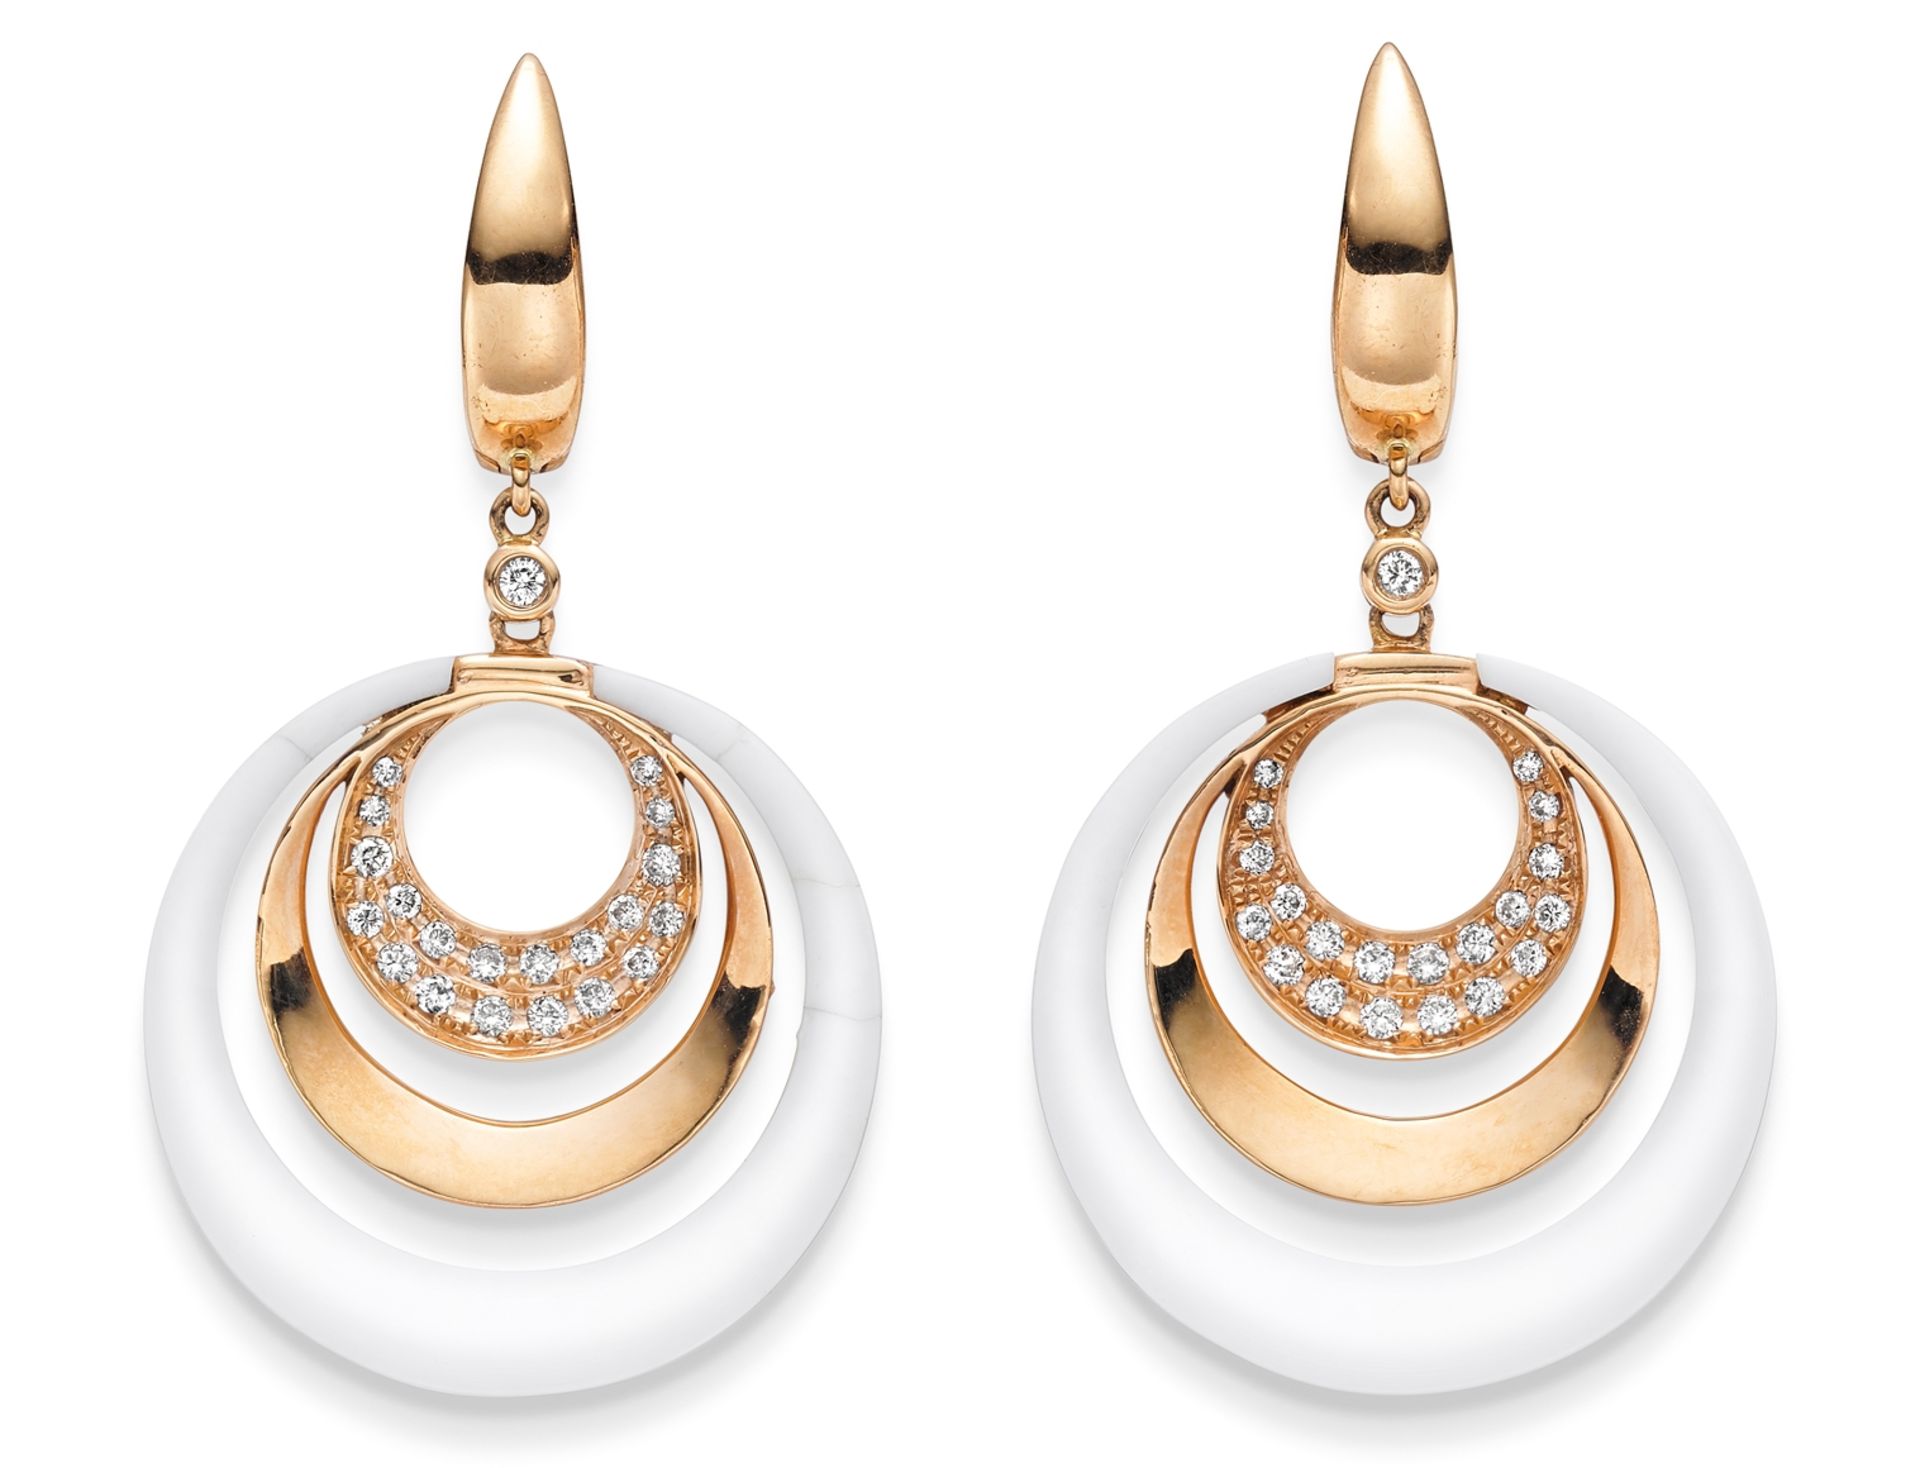 Pair of earrings with white jade and diamonds